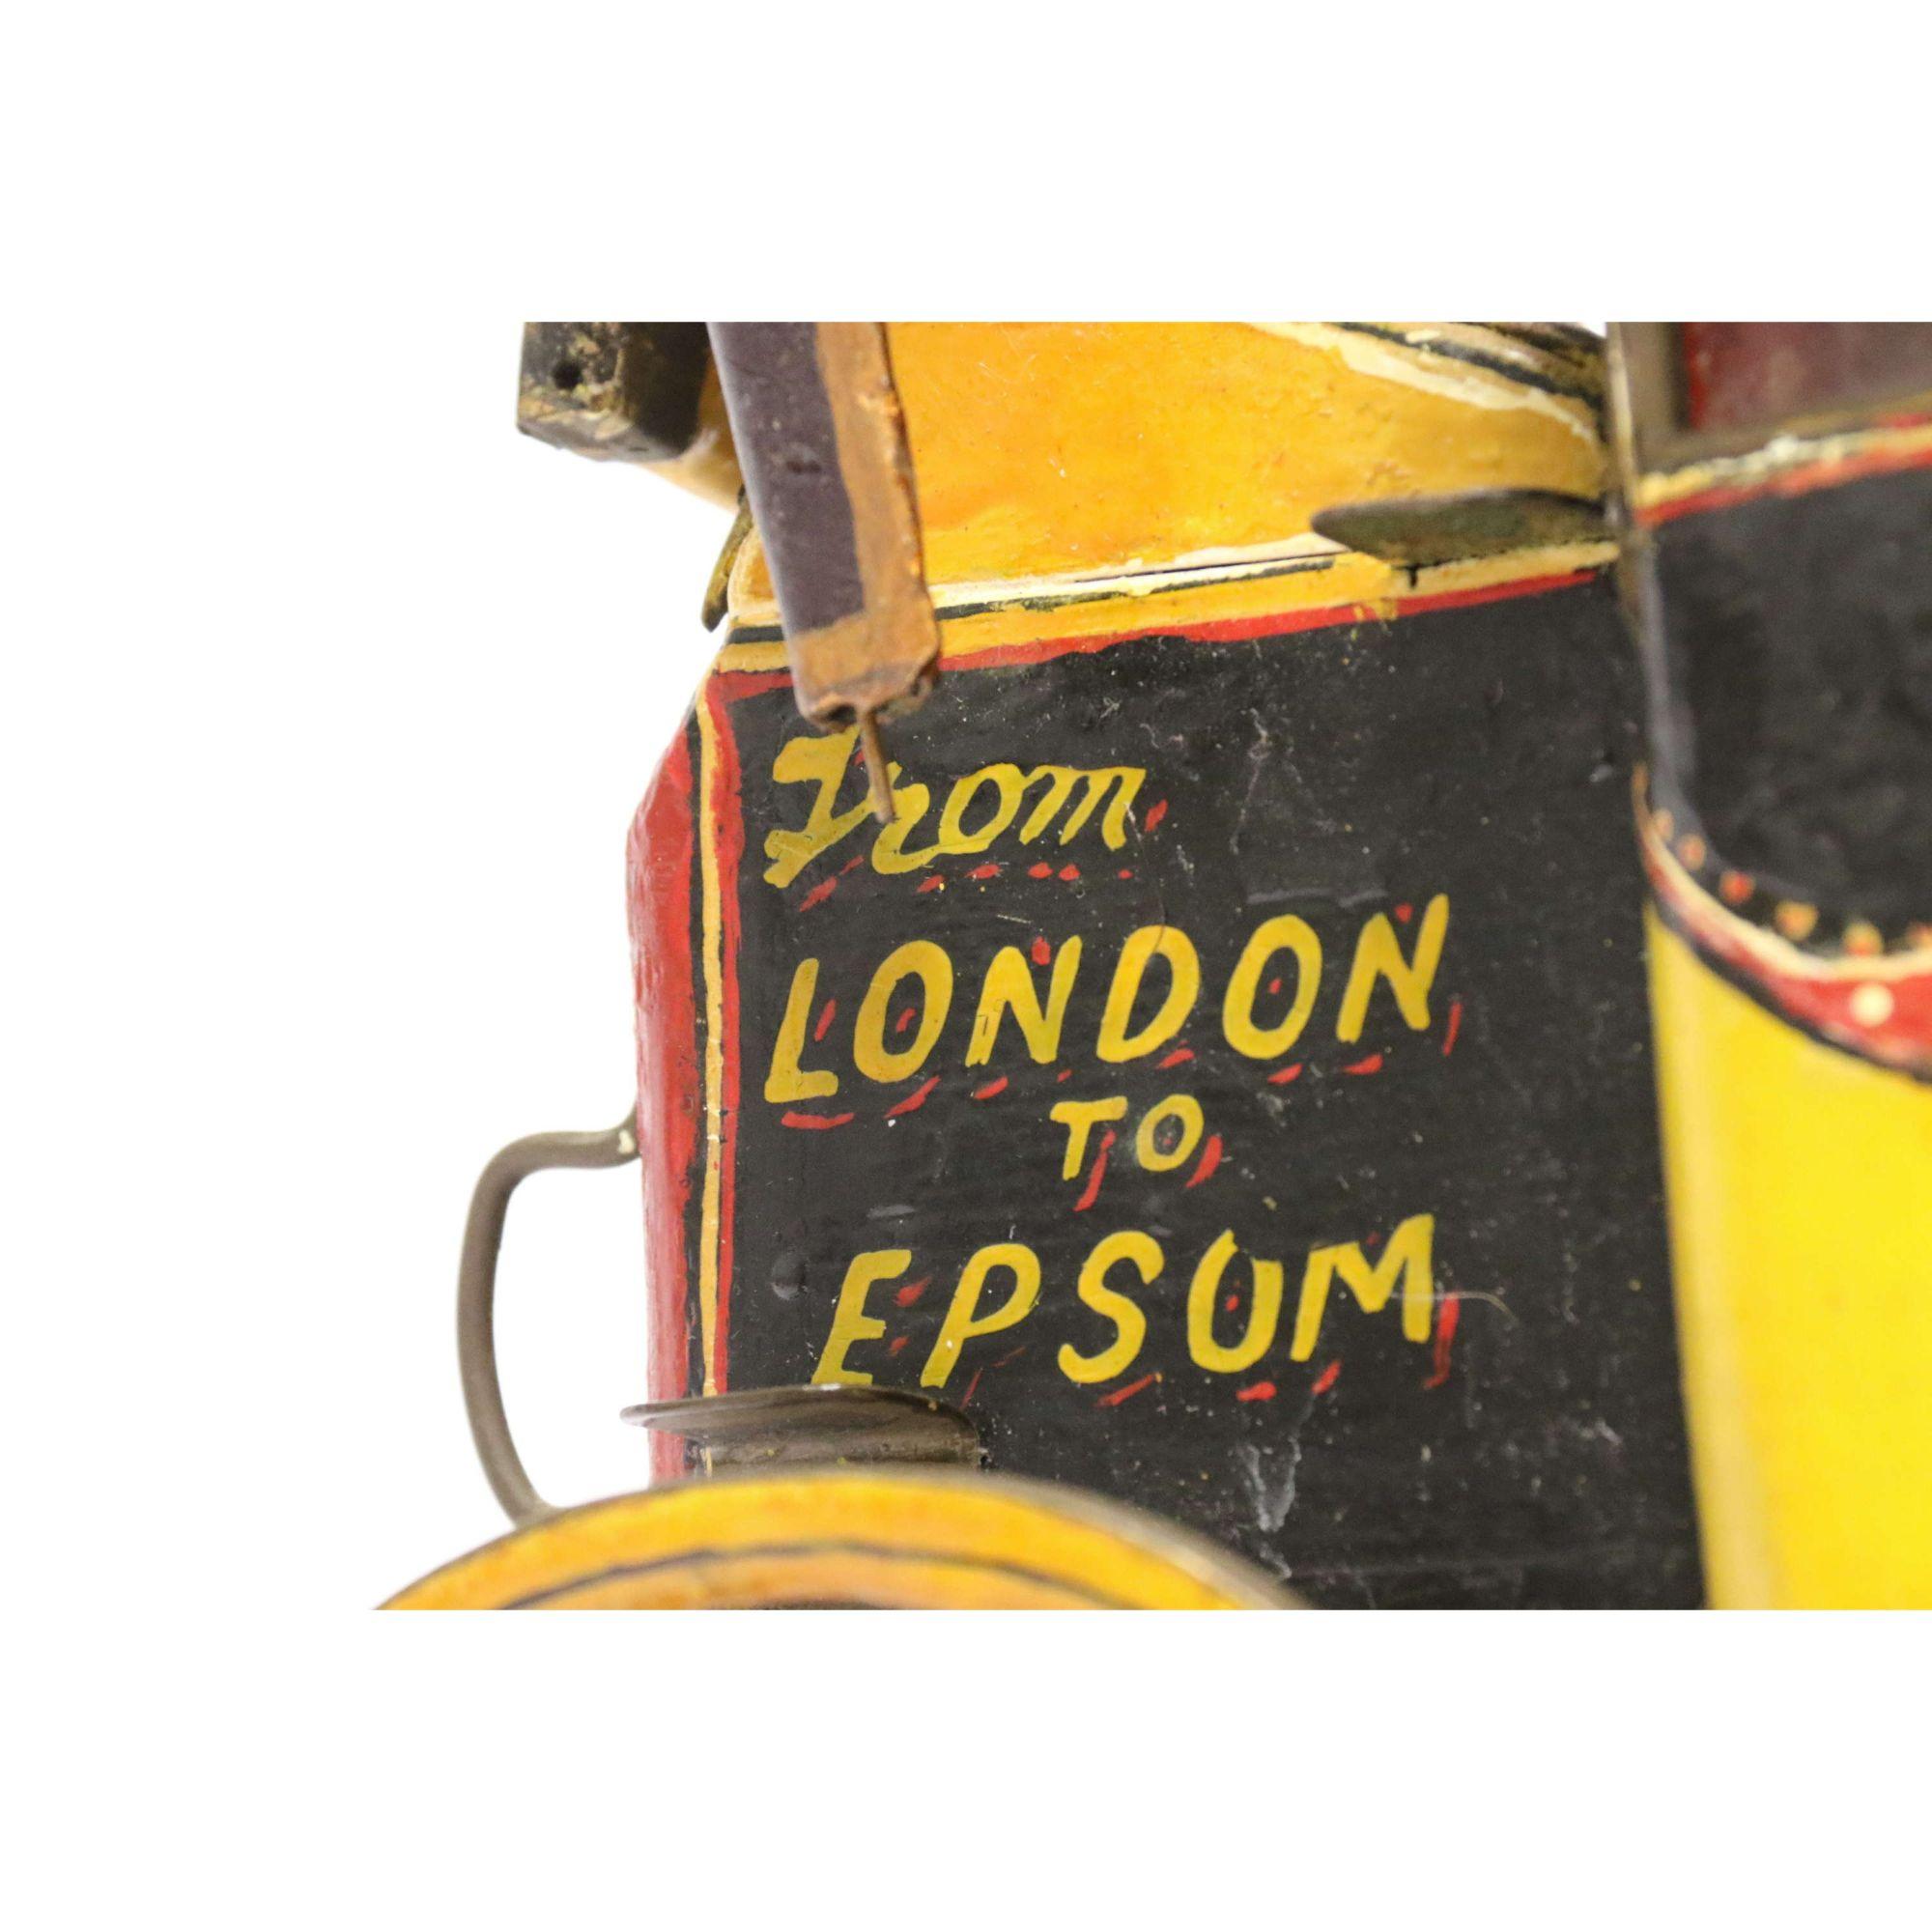  English Model of an 18th Century London to Epsom Stagecoach, Edwardian Period 1